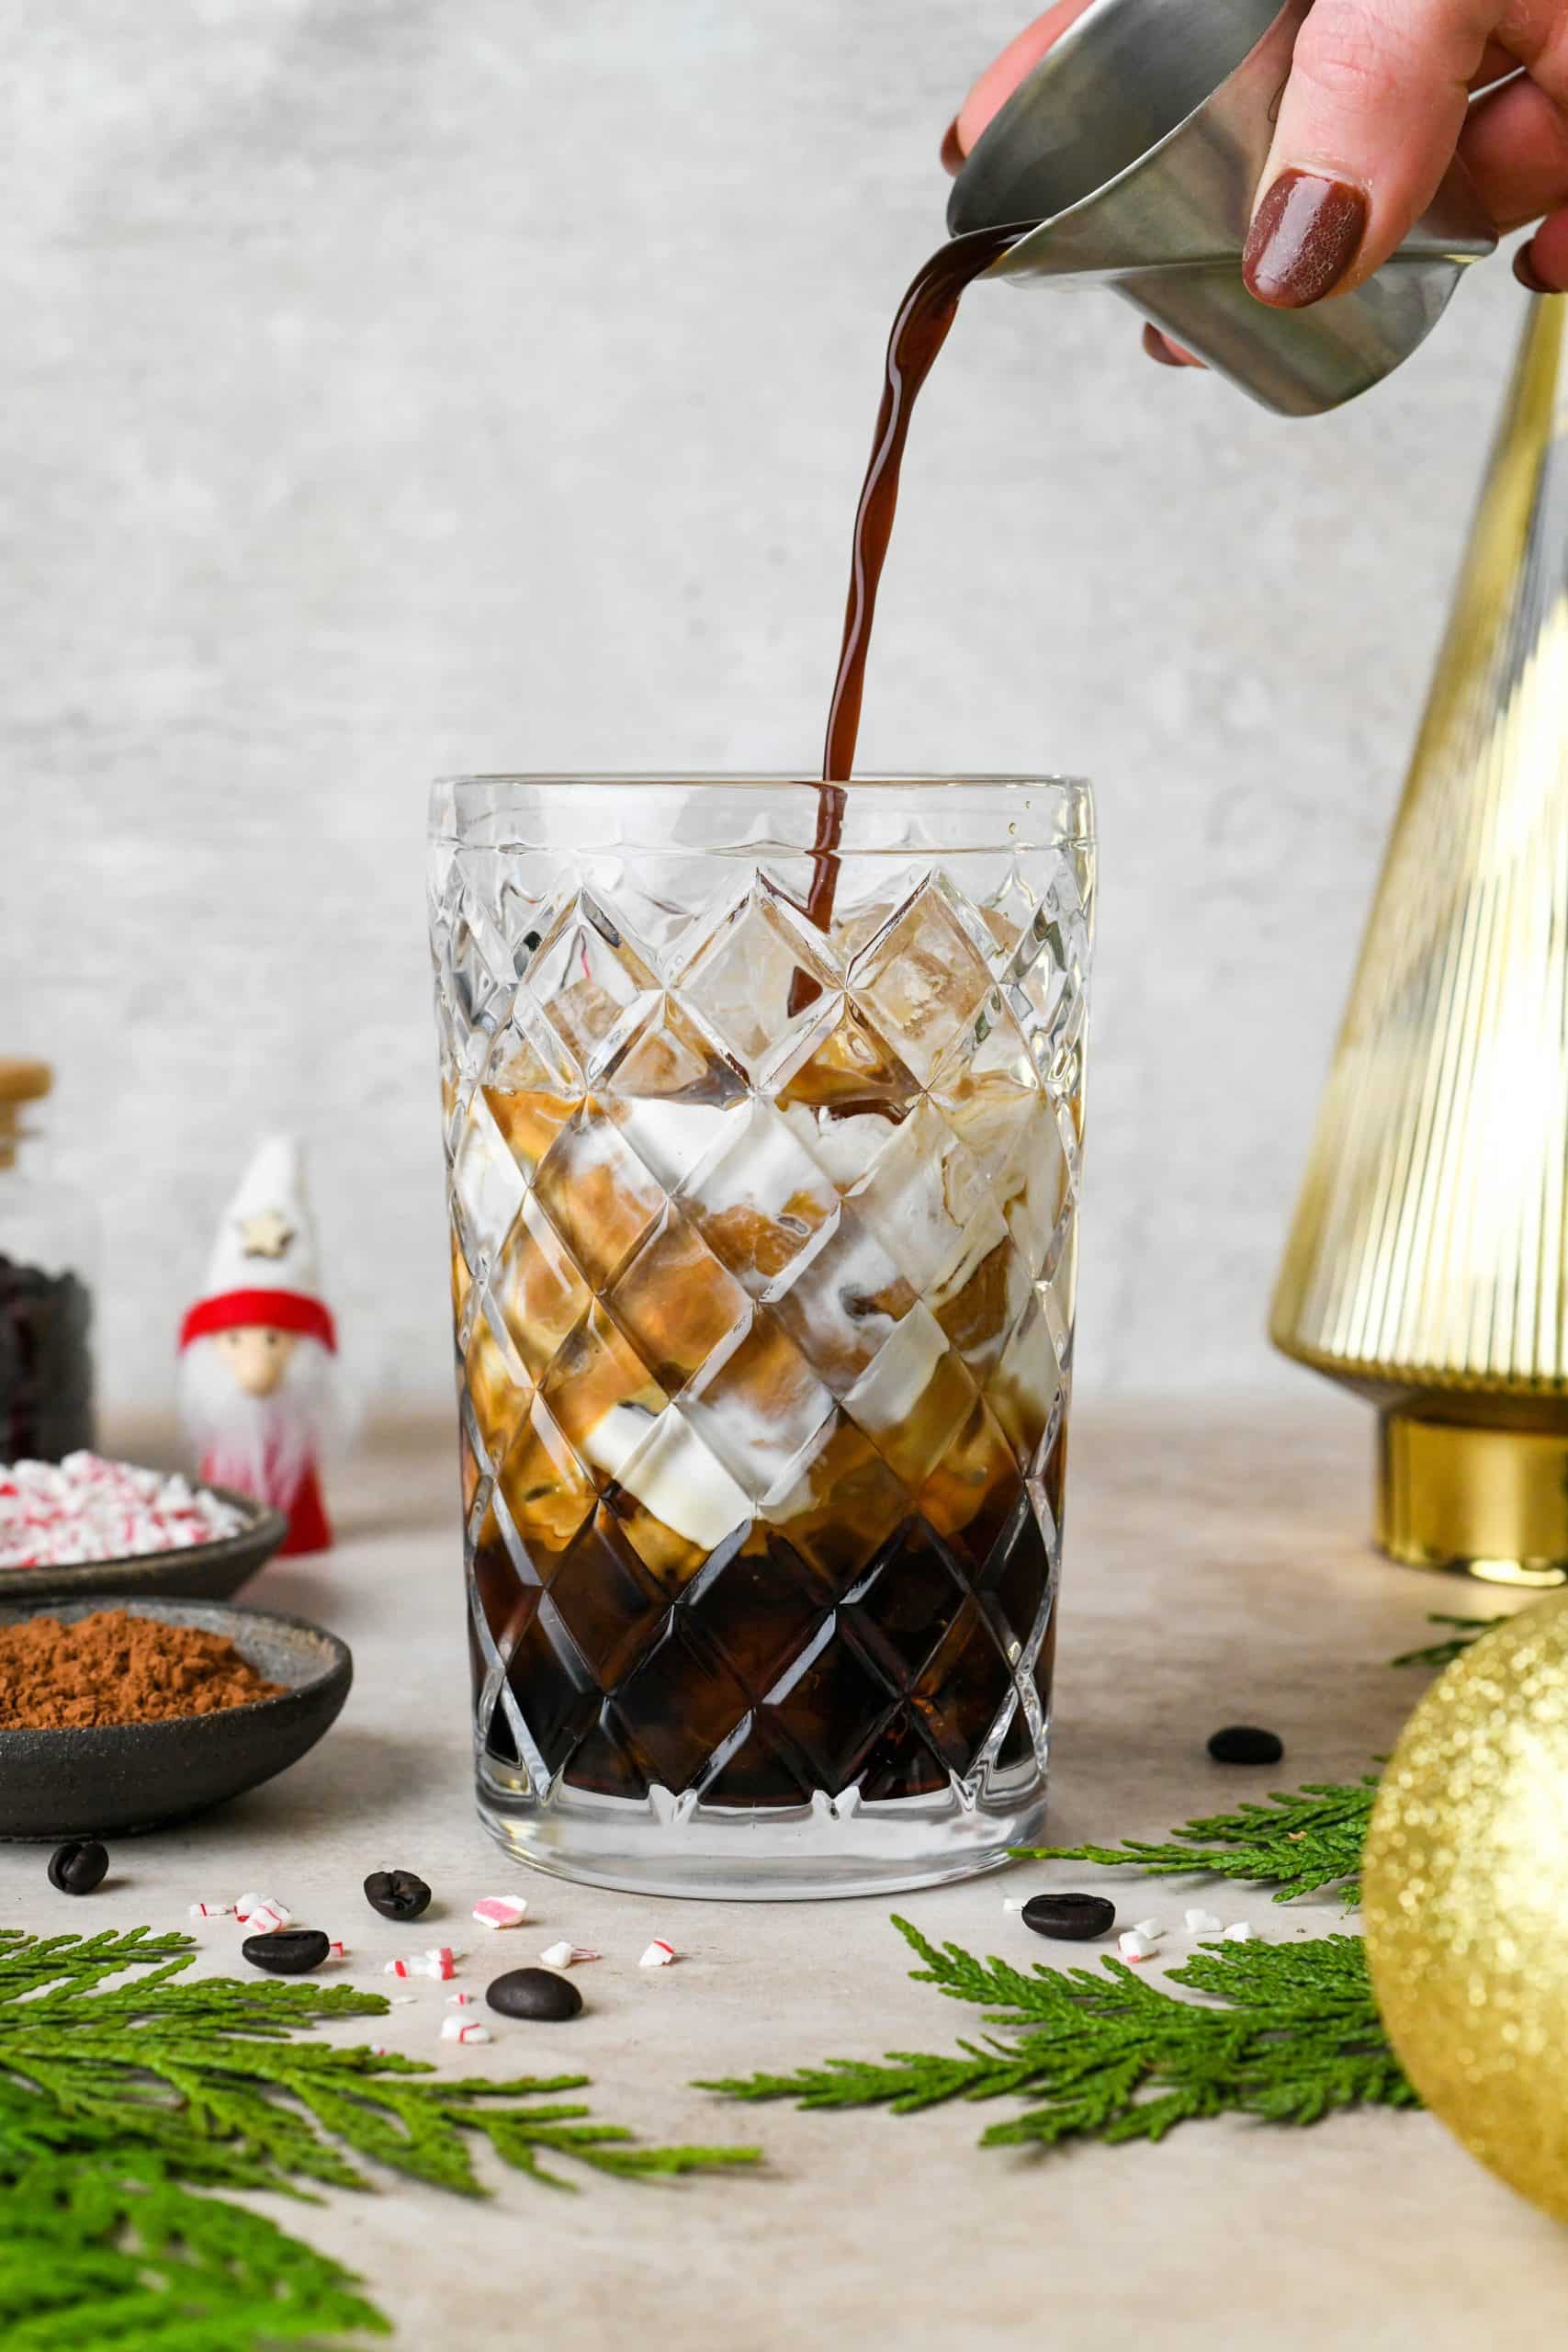 How to make Peppermint Mocha Espresso Martinis: Adding the espresso to an etched glass cocktail shaker filled with ice.